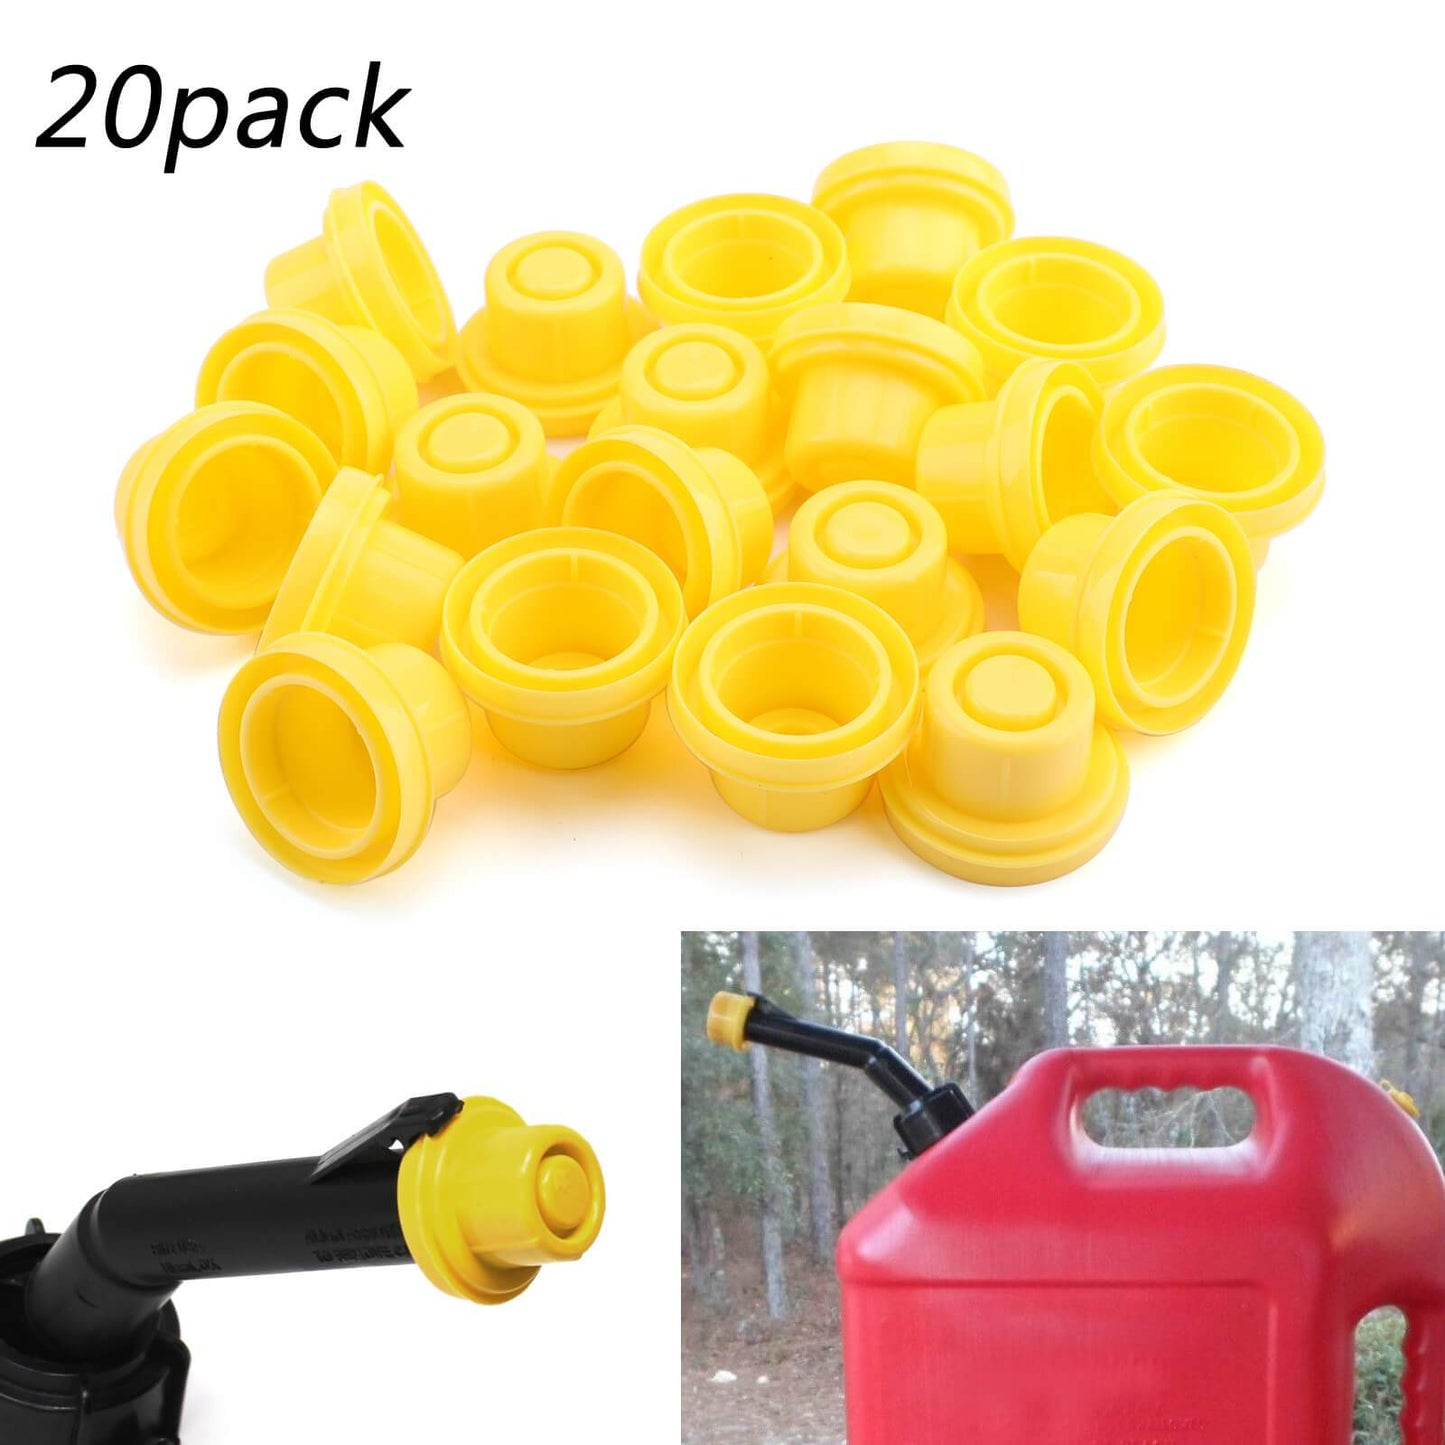 5x Replacement YELLOW SPOUT CAP Top For BLITZ Fuel GAS CAN 900302 900092 900094